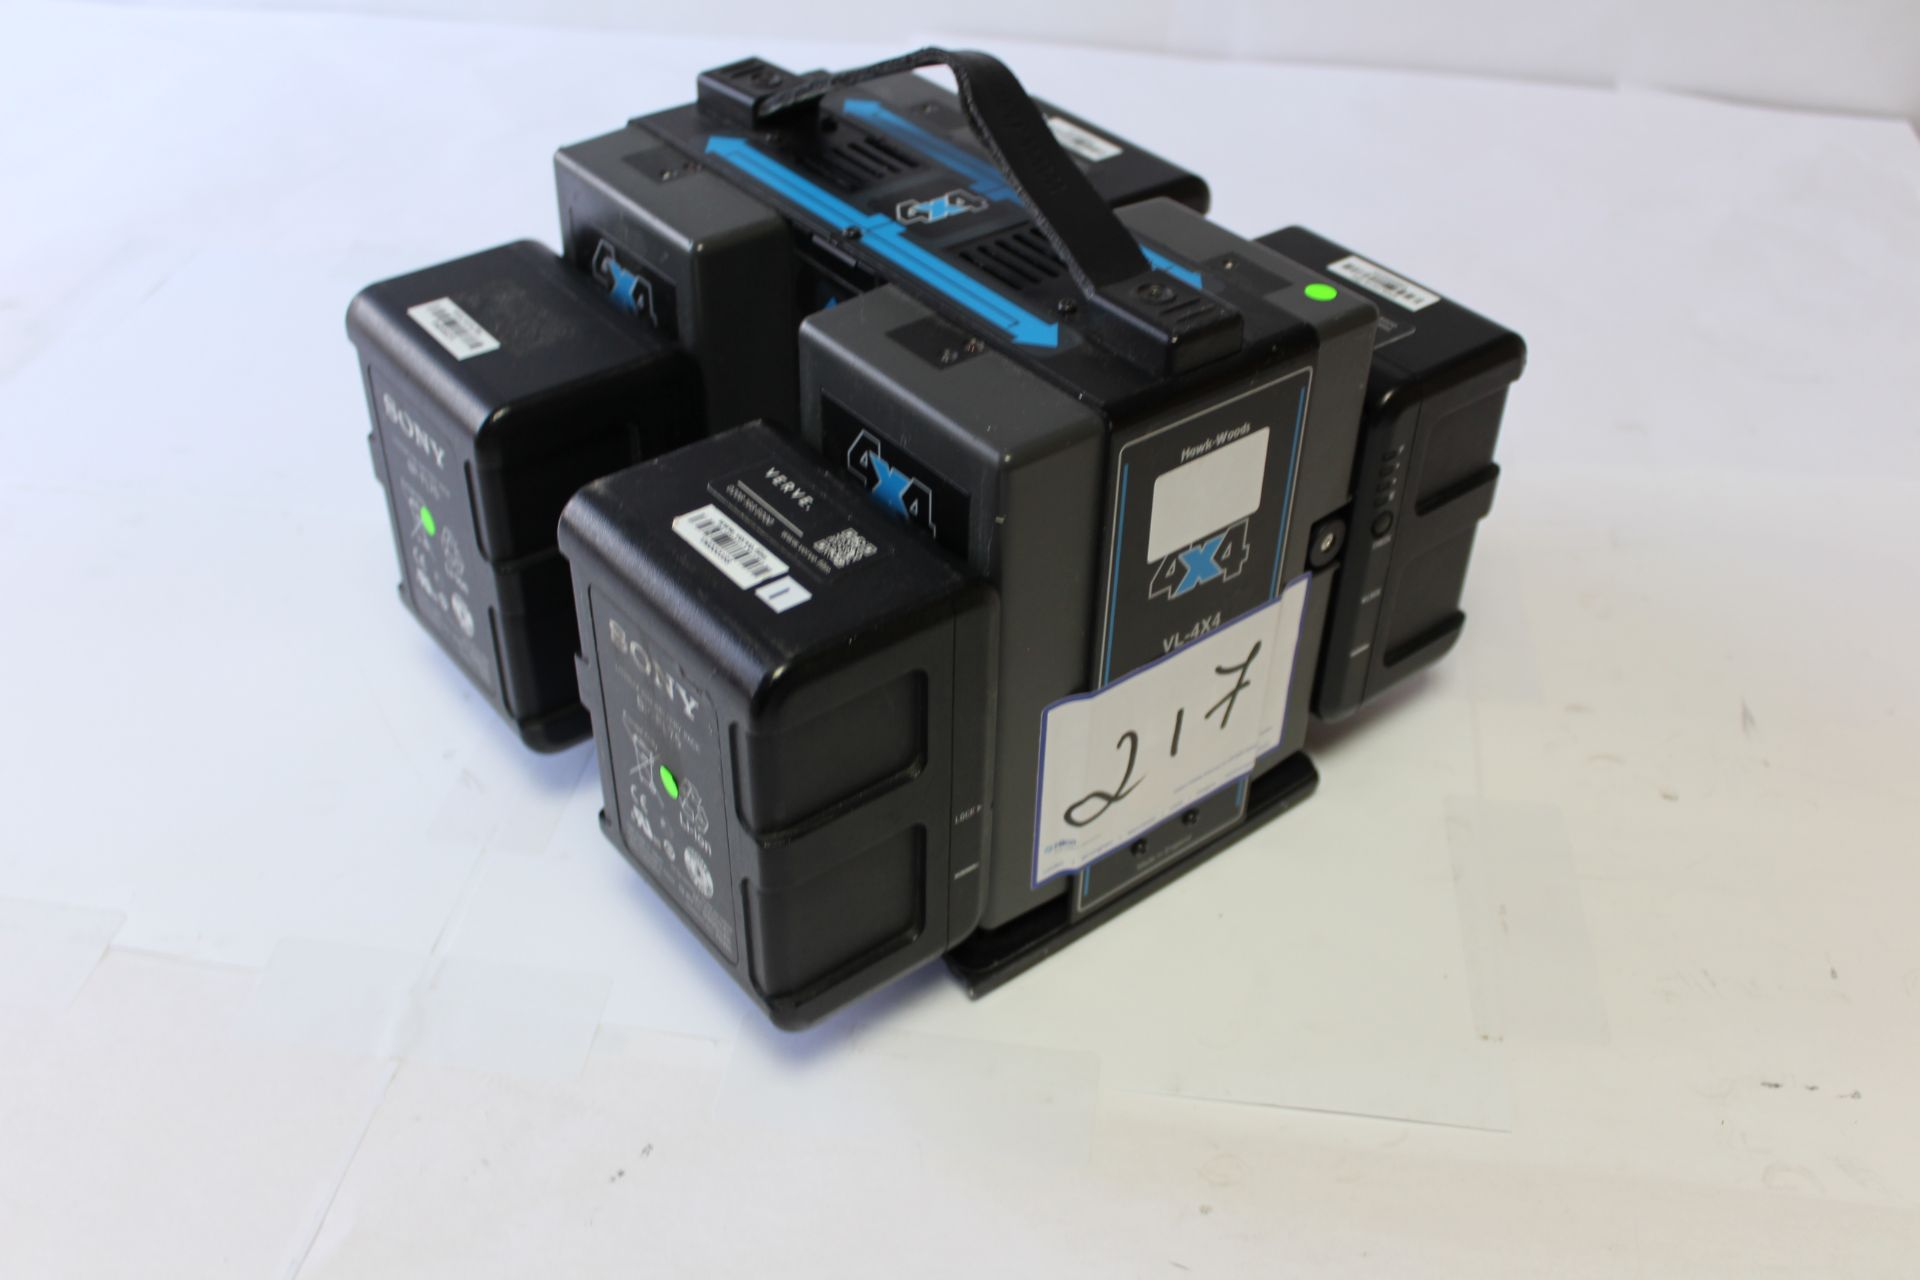 Hawk-Woods VL-4X4 Siultanious Battery Charger with 4 Sony BP-FL75 Lithium -Ion Battery Packs